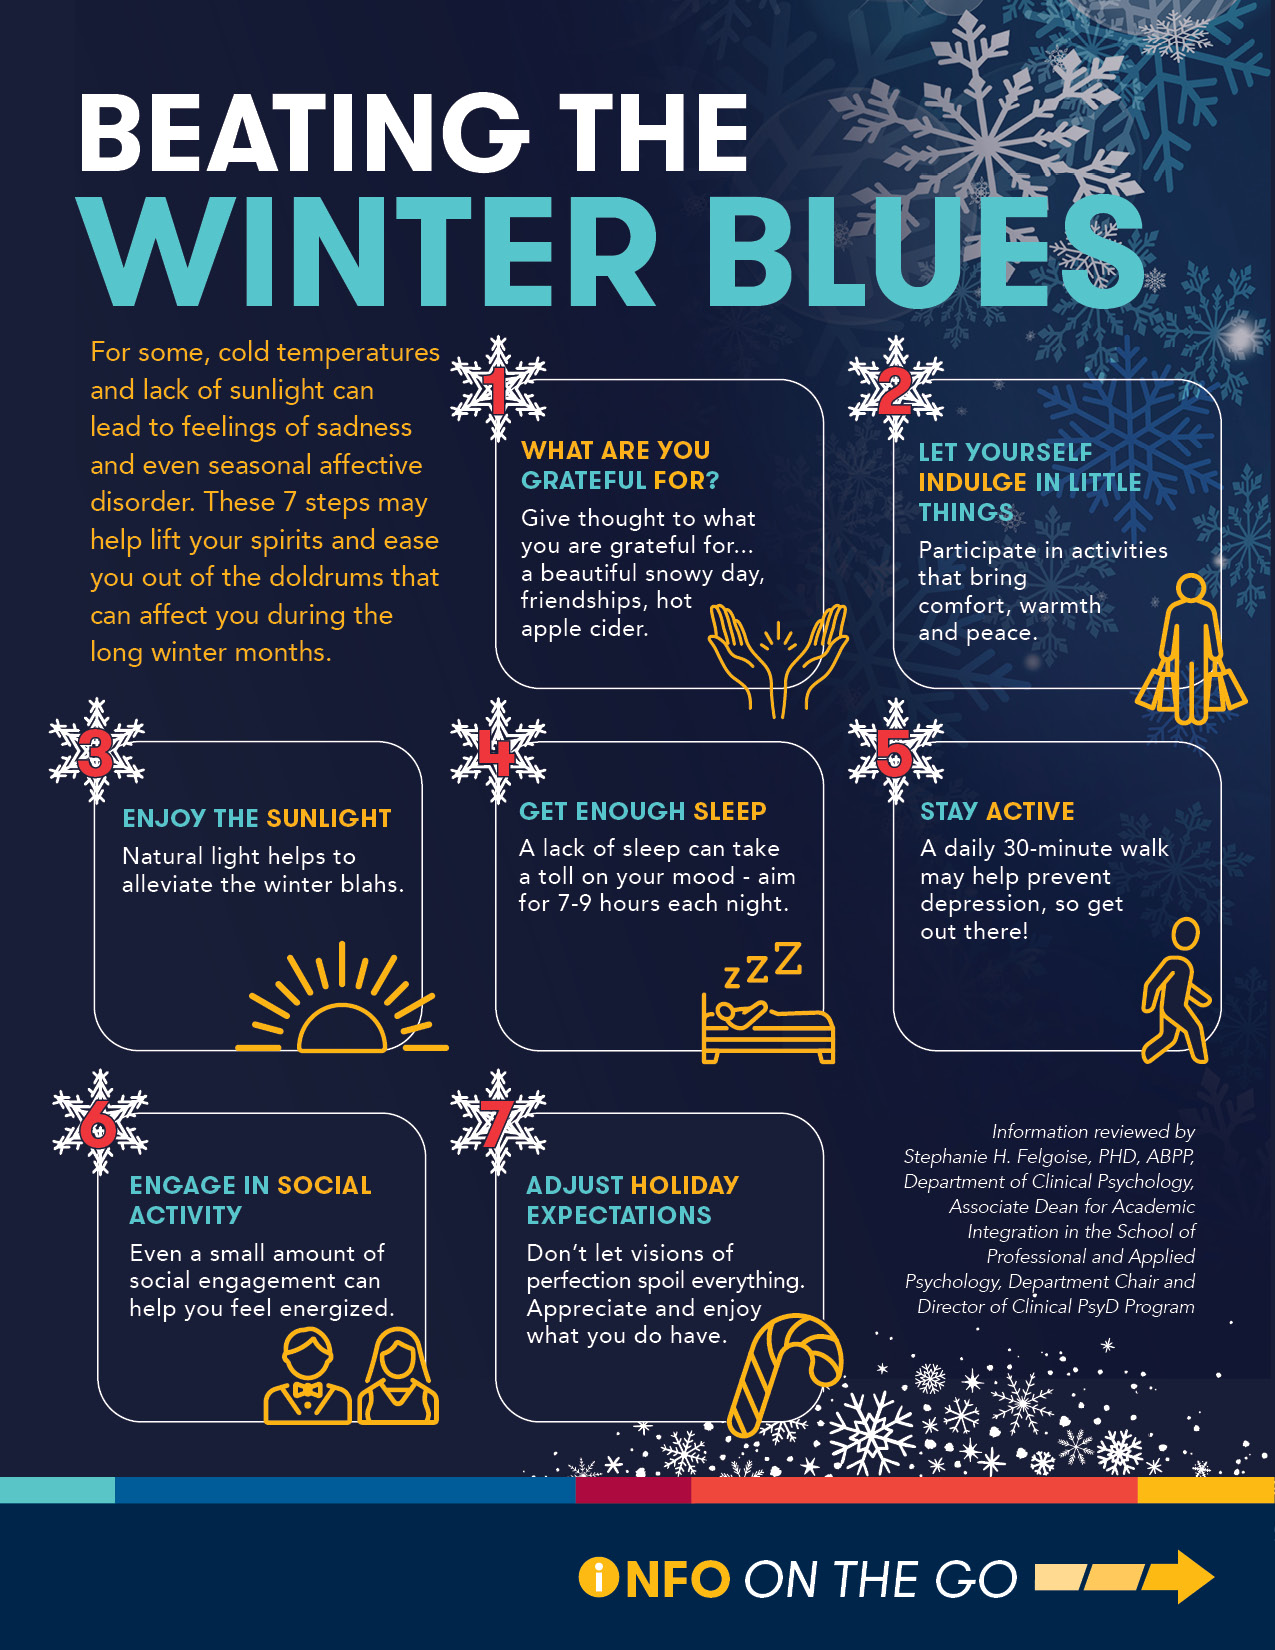 Infographic showing snowflakes and activities icons and seven tips for alleviating seasonal depression through exercise, social activity, sleep and more.